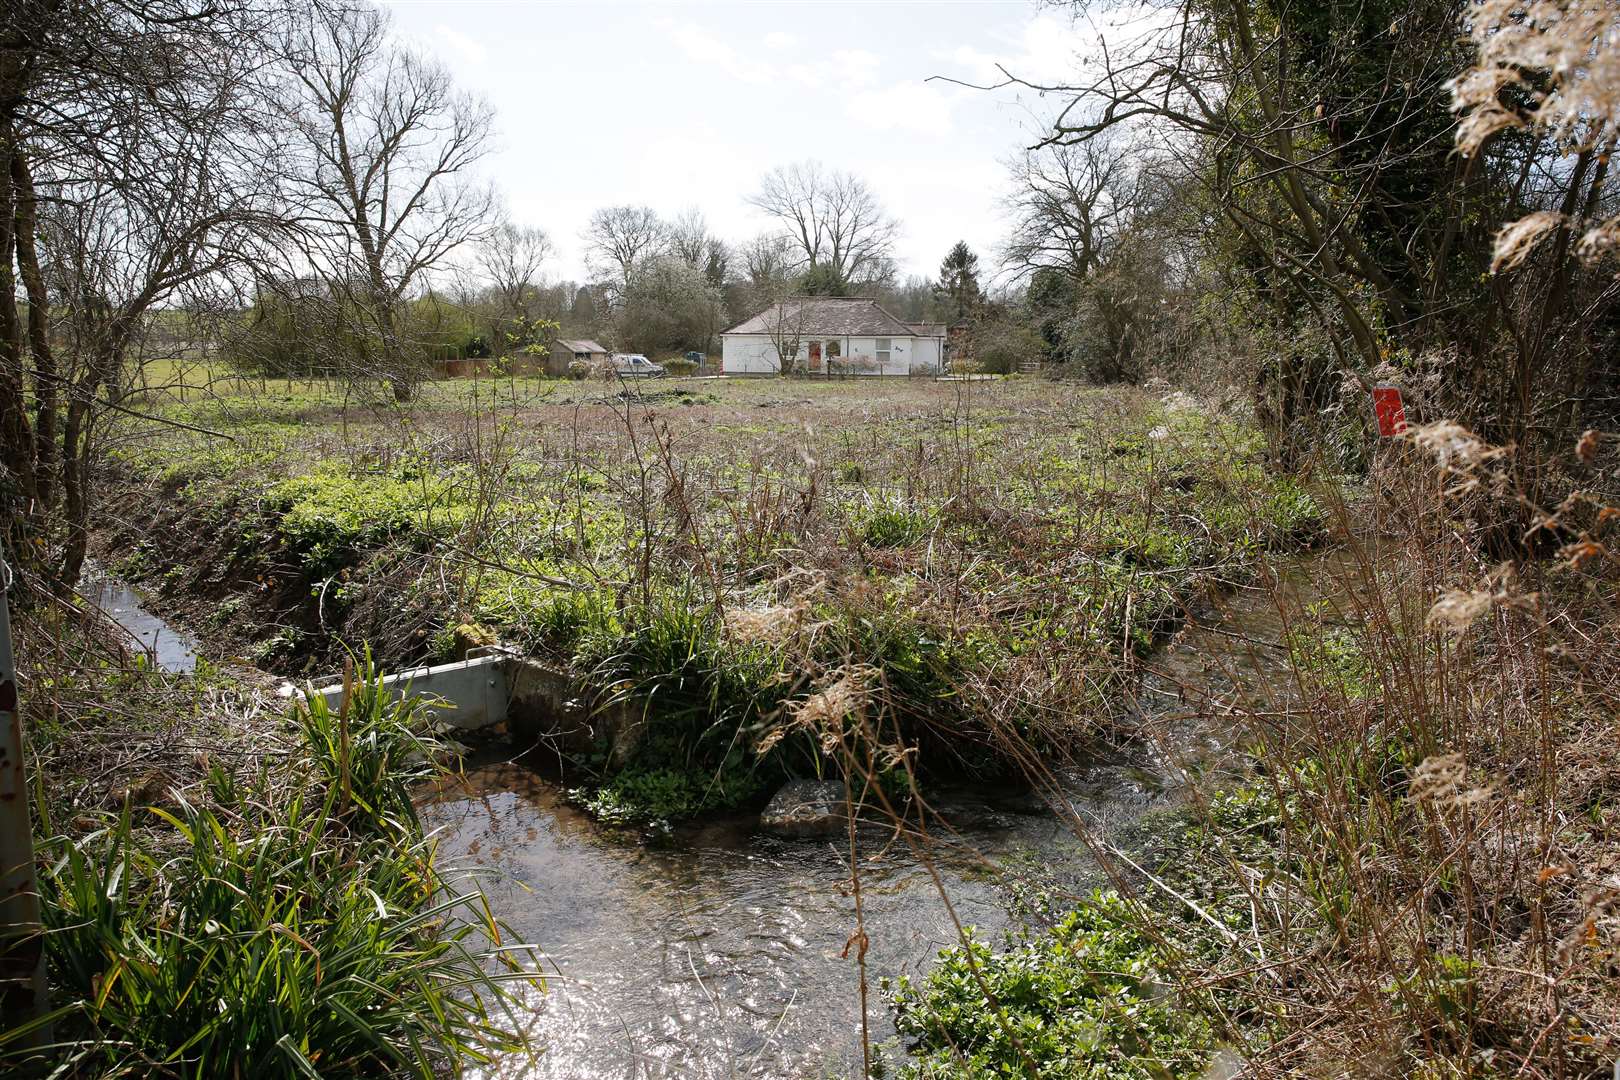 Parkwood Trout Farm said the sewage plans could pollute their stream. Picture: Matthew Walker